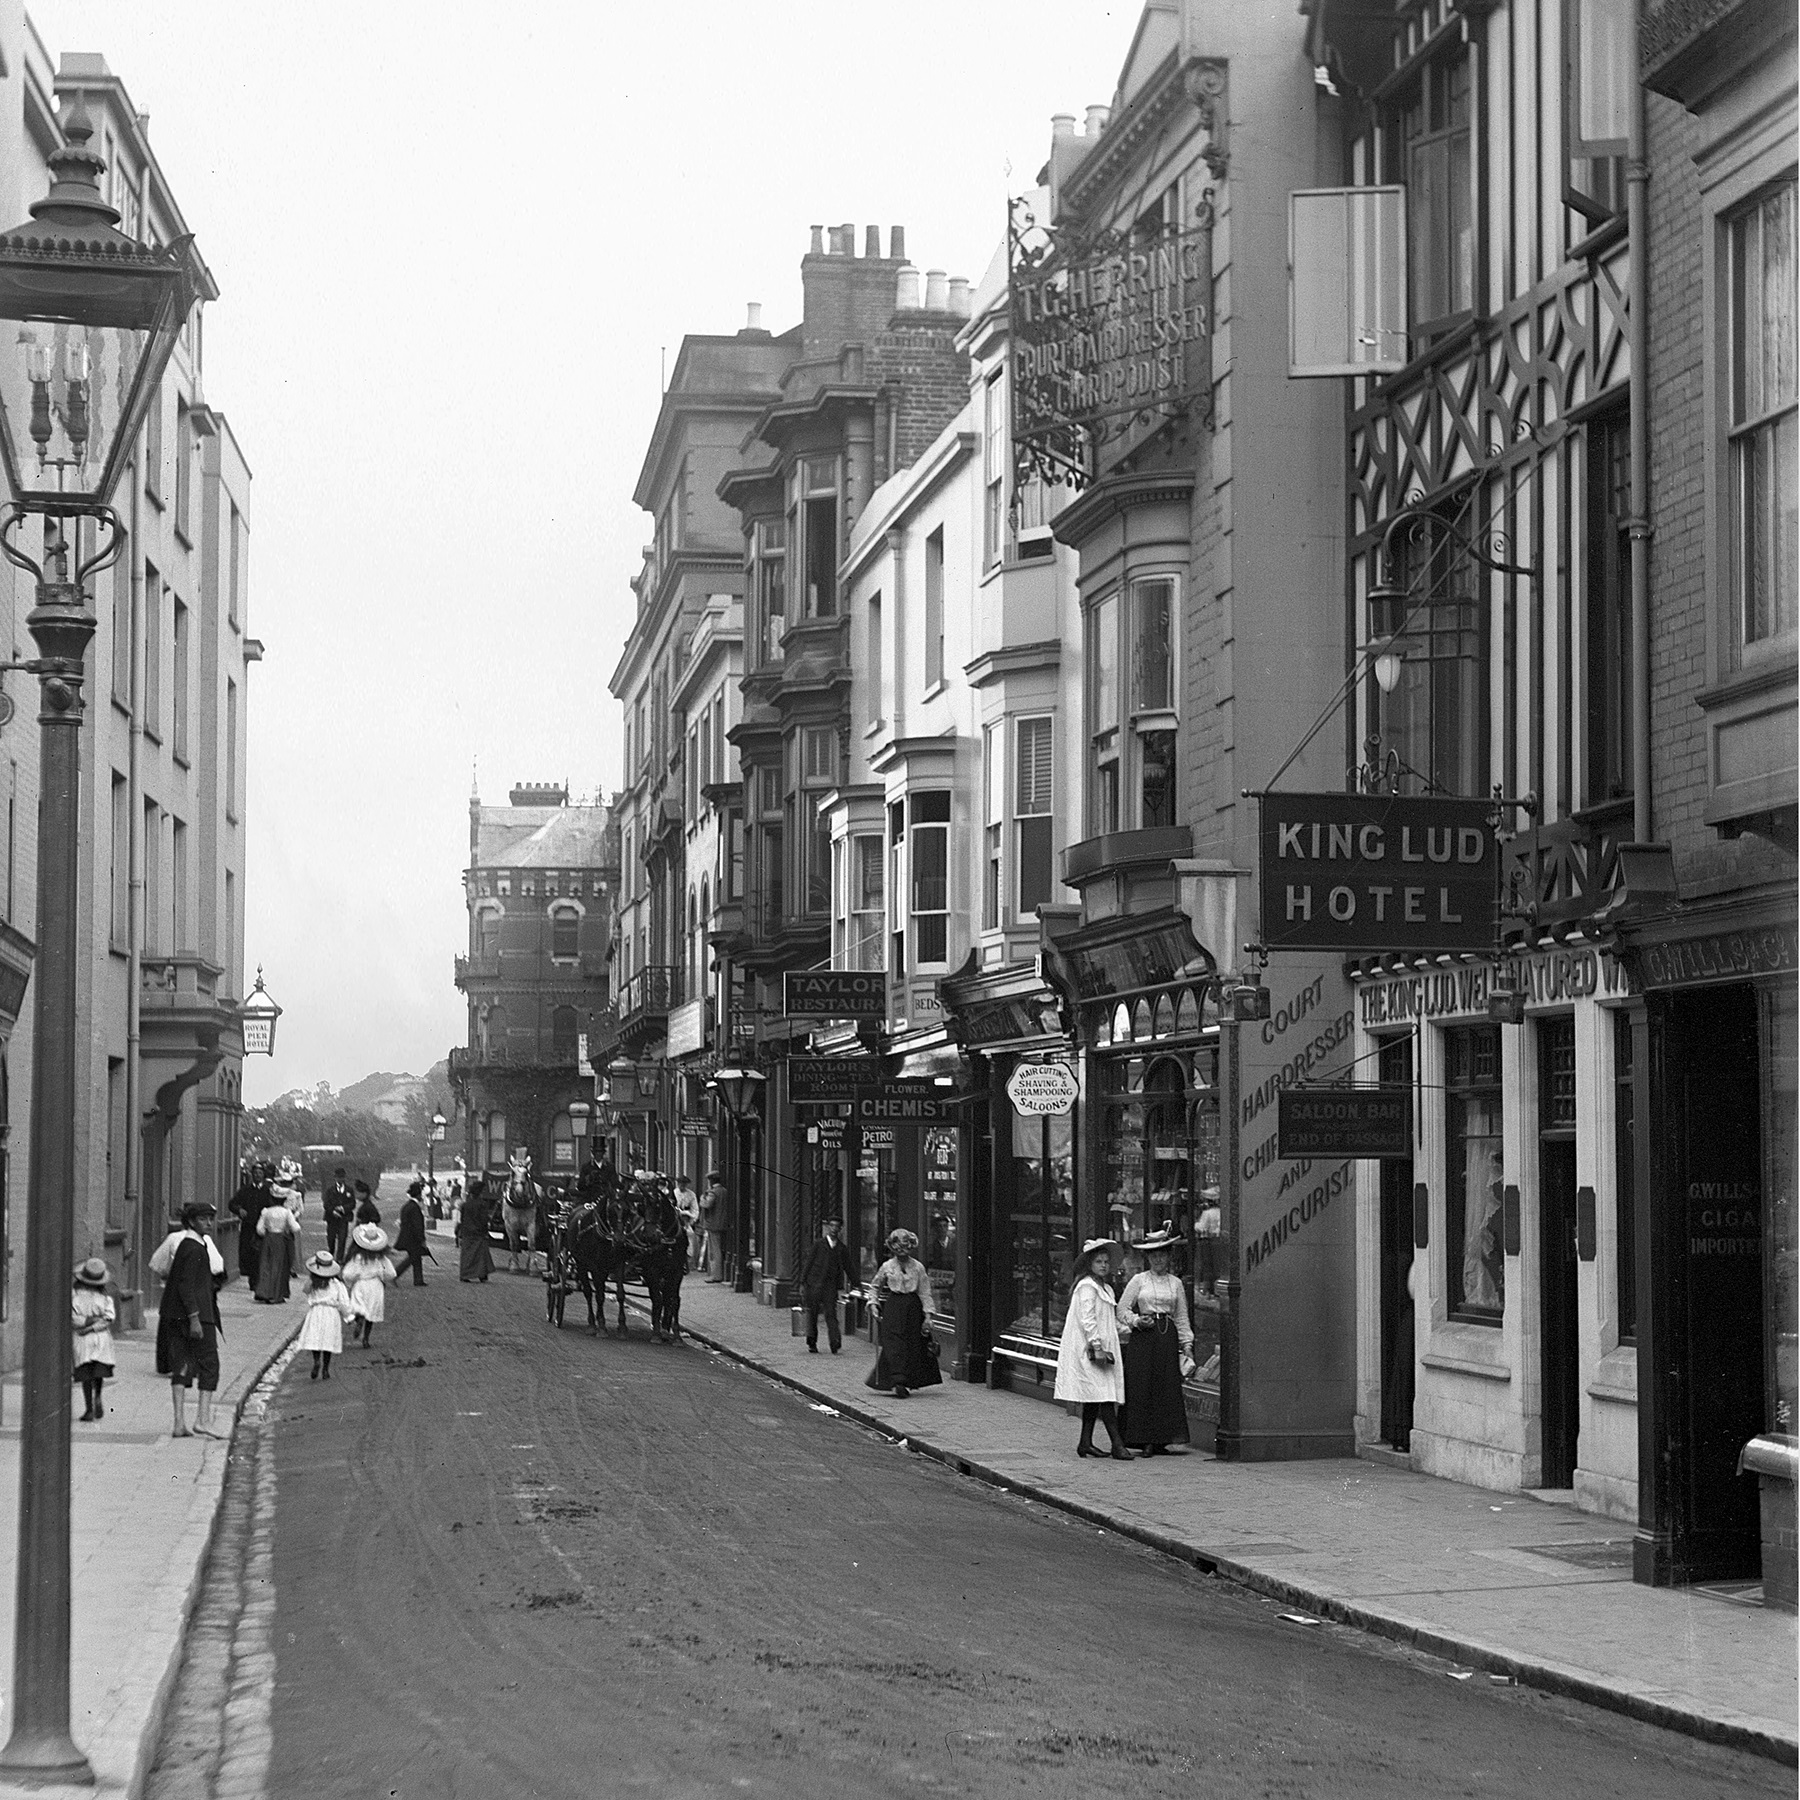 This is Pier Street in 1913. On the left is the side of the Royal Pier Hotel and on the right, the King Lud with its mock Tudor front.